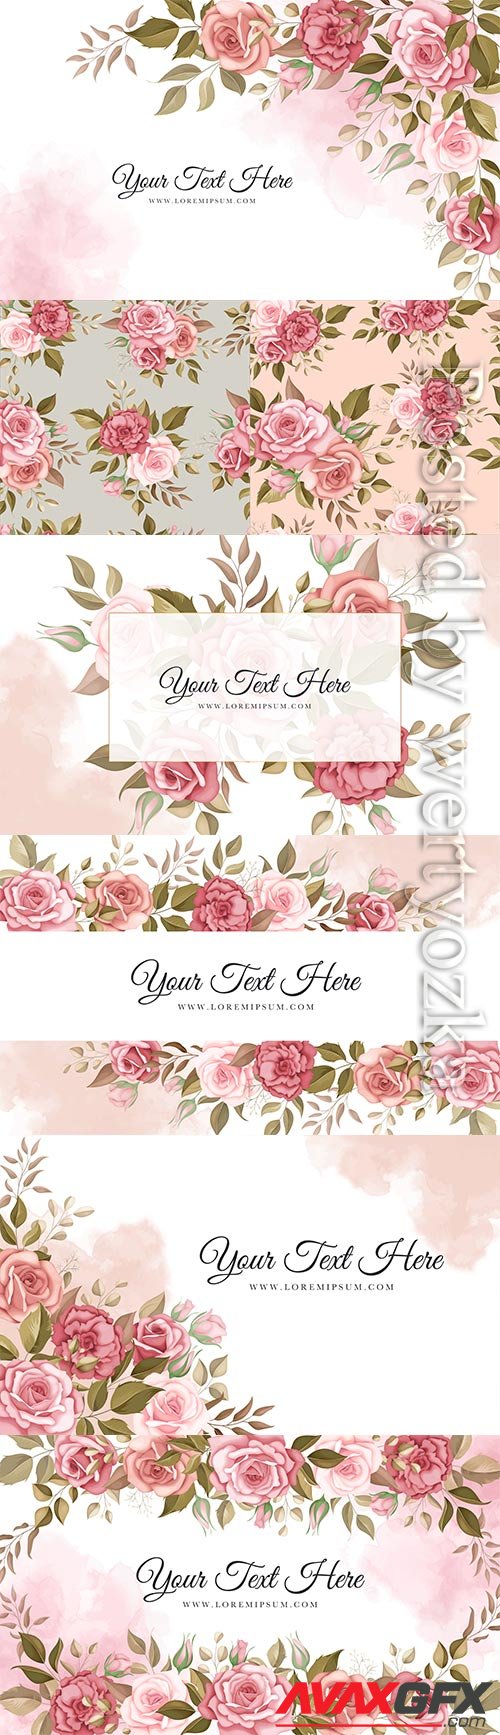 Elegant floral vector background with romantic roses